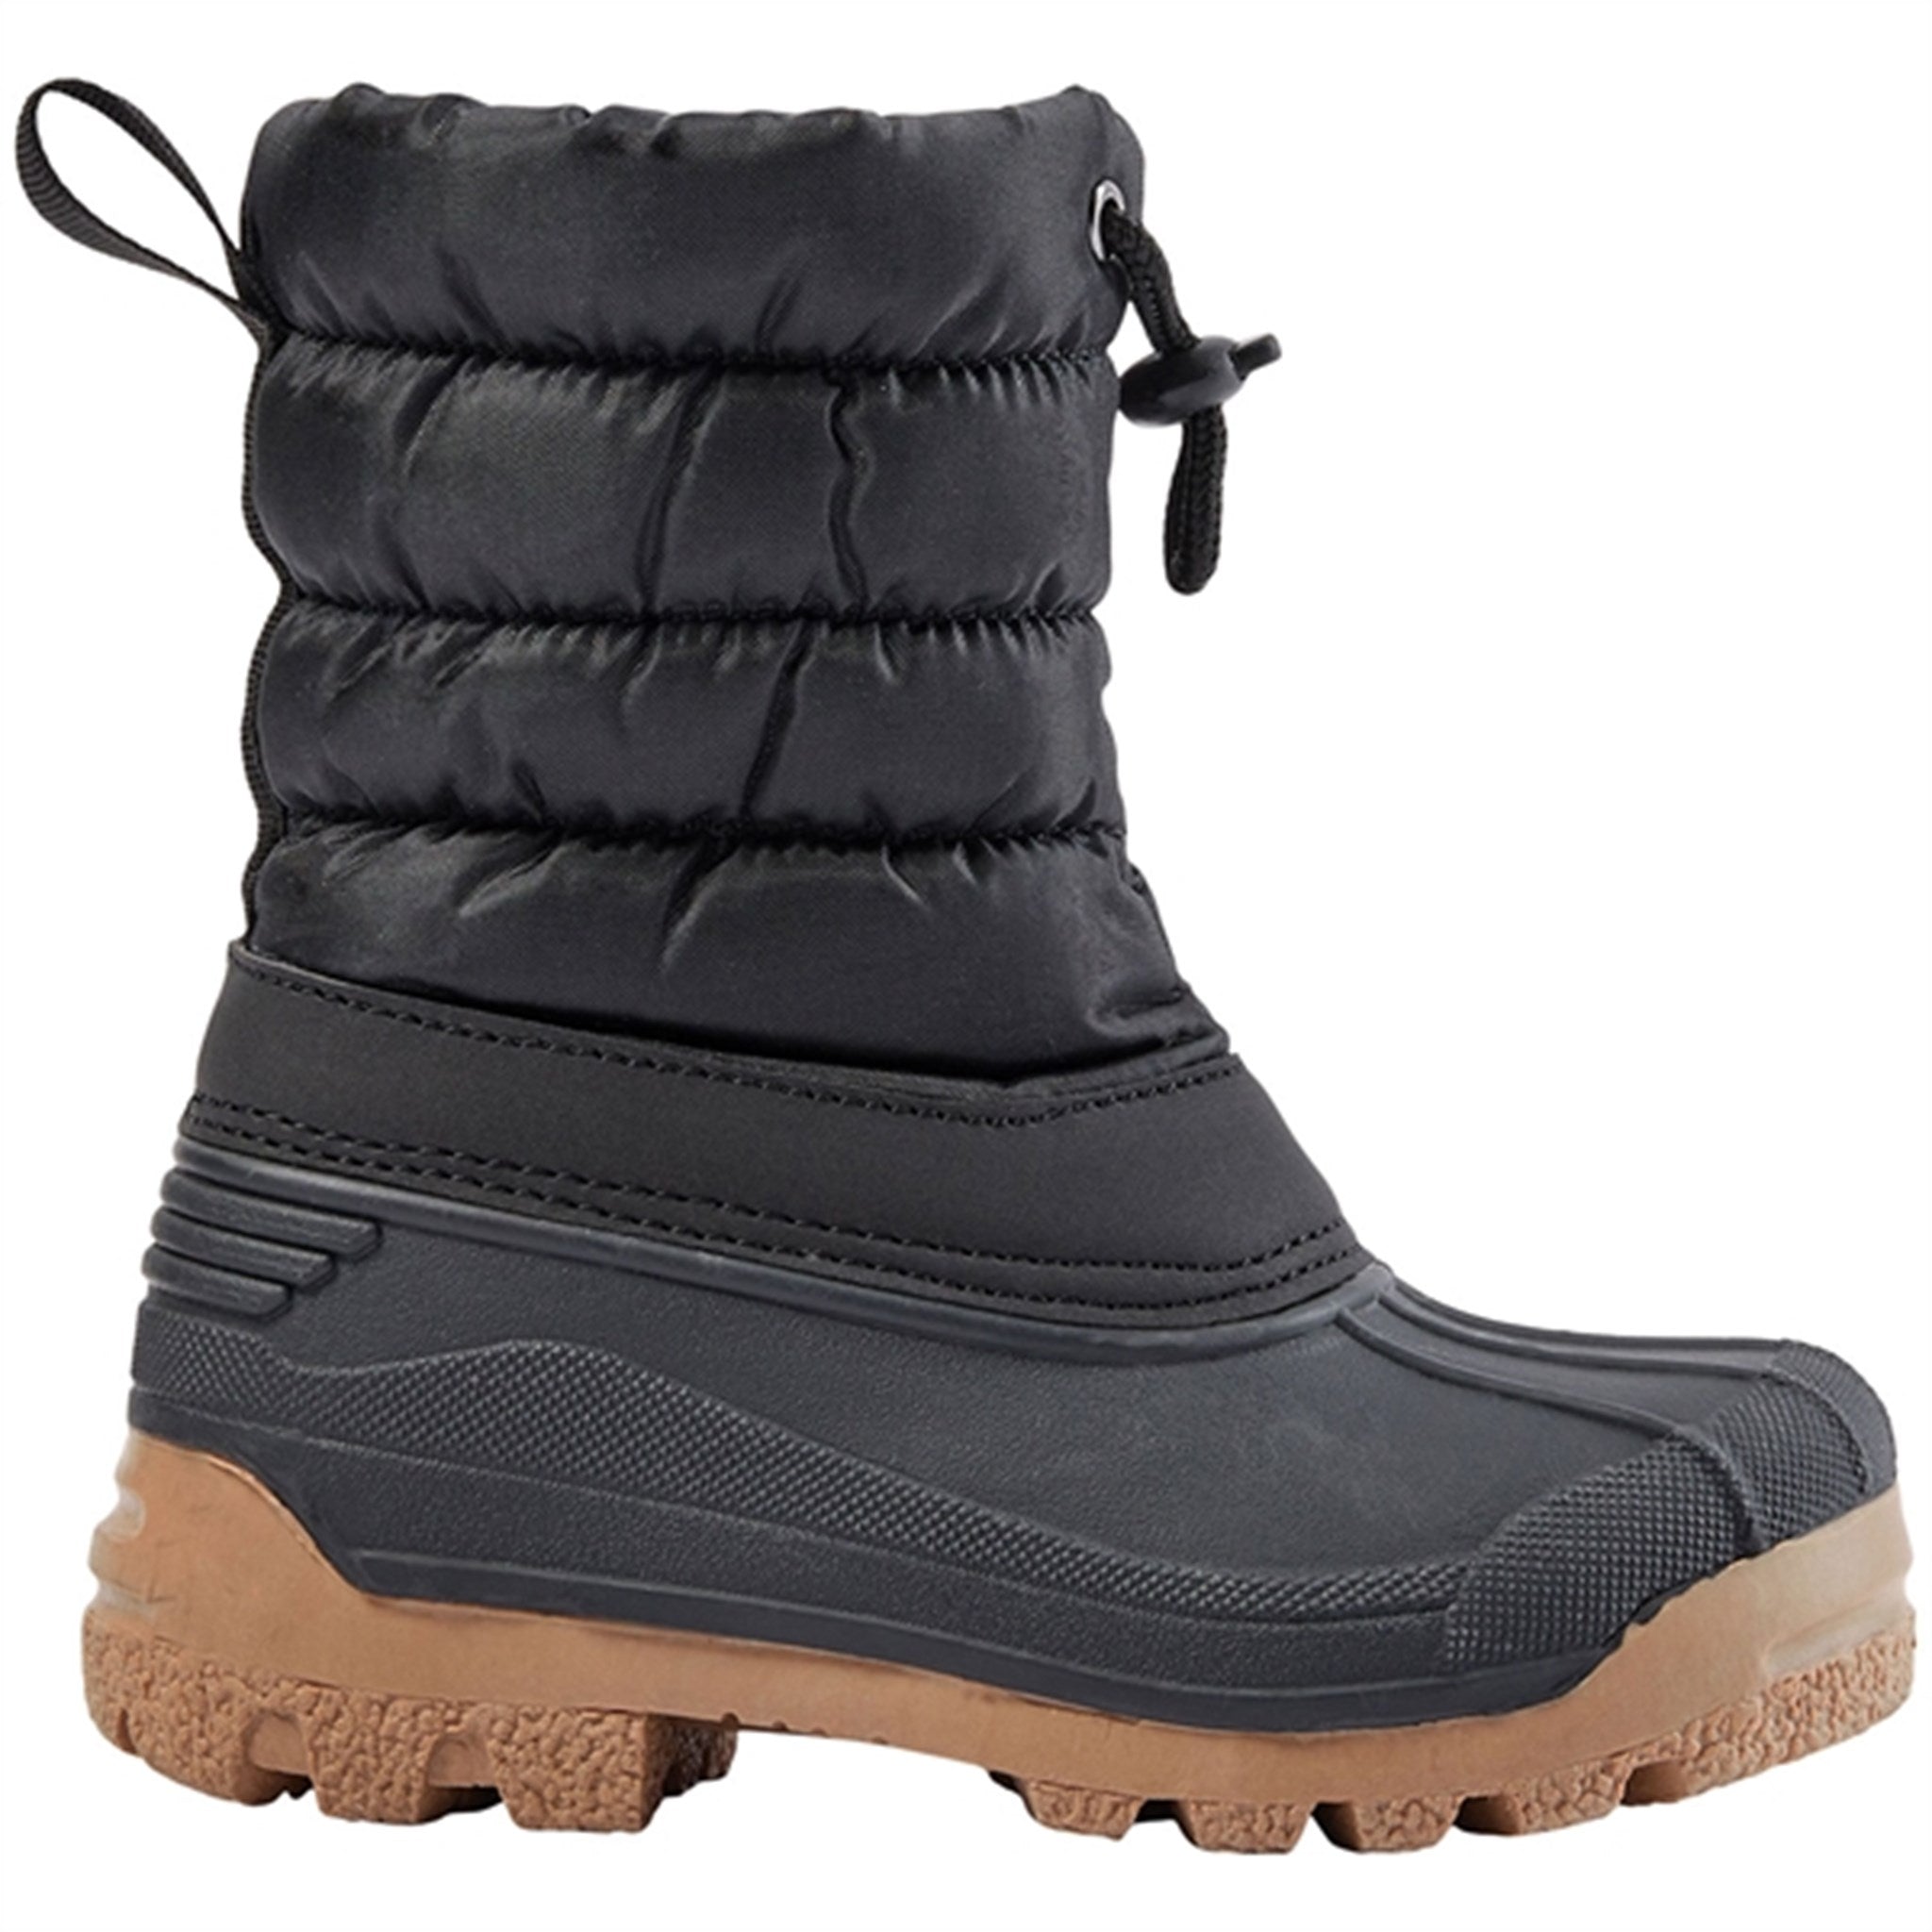 Sofie Schnoor Thermo Boots Black